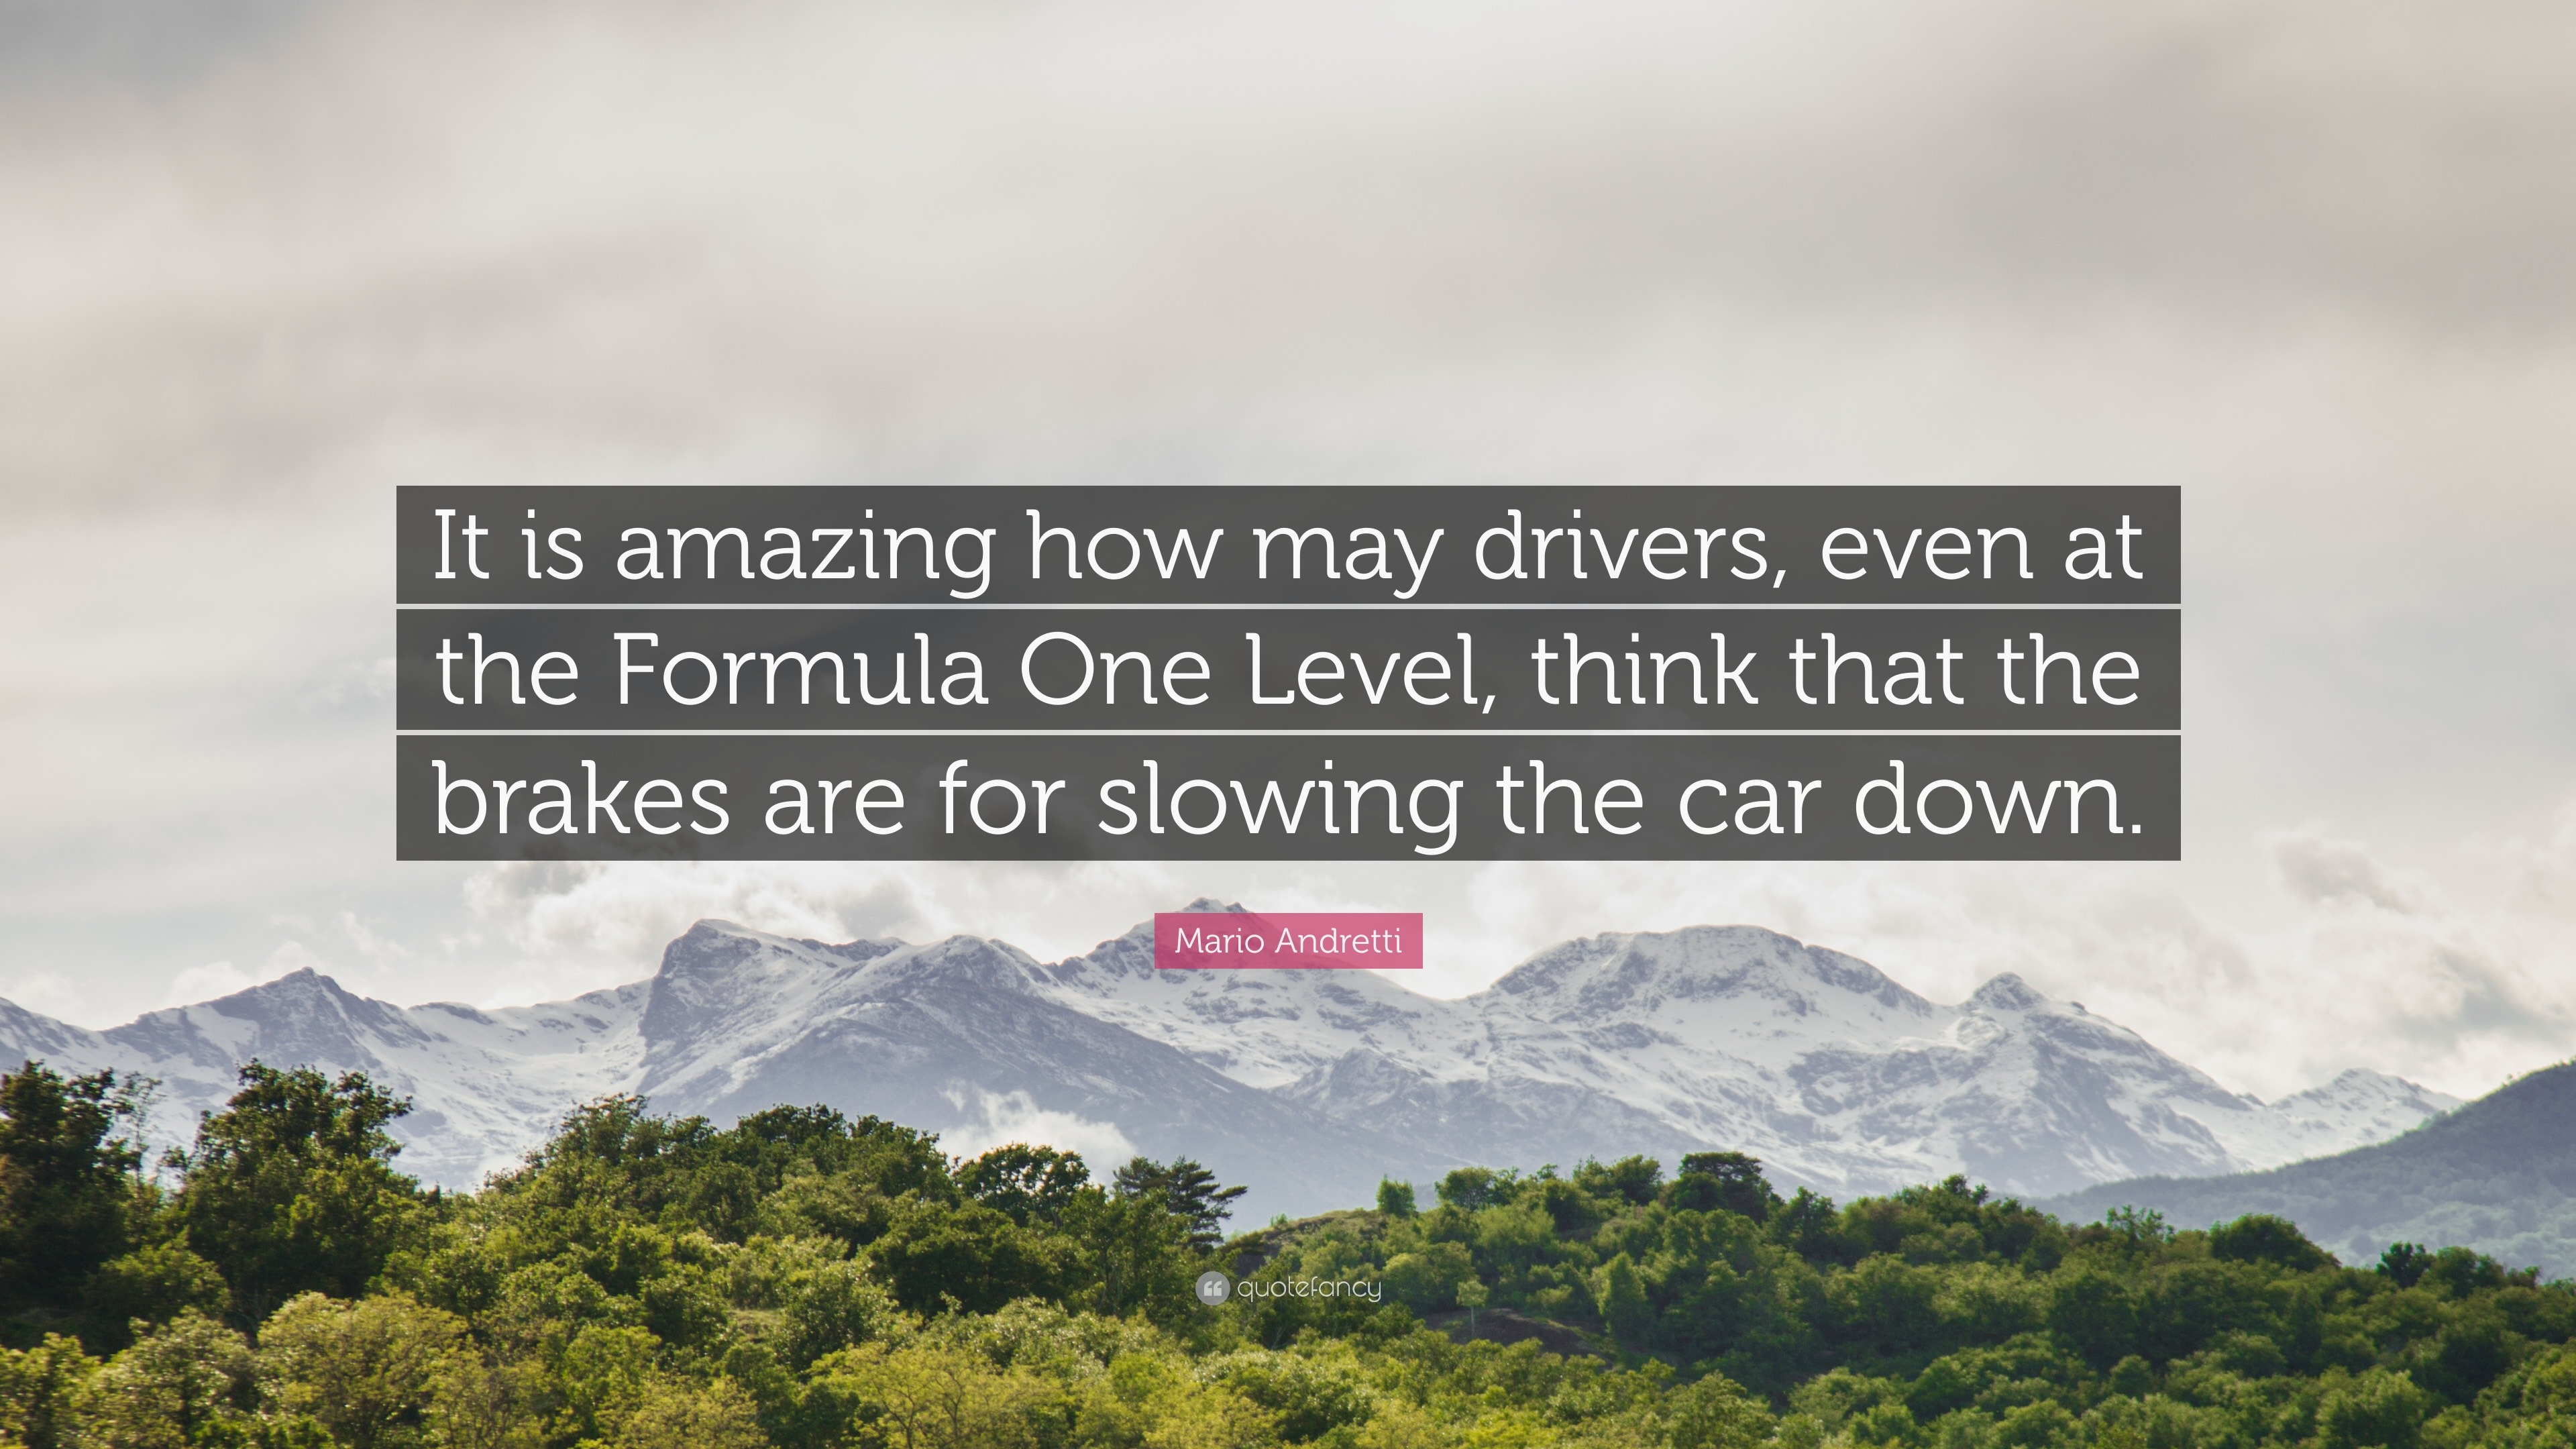 Mario Andretti Quote It Is Amazing How May Drivers Even At The Images, Photos, Reviews